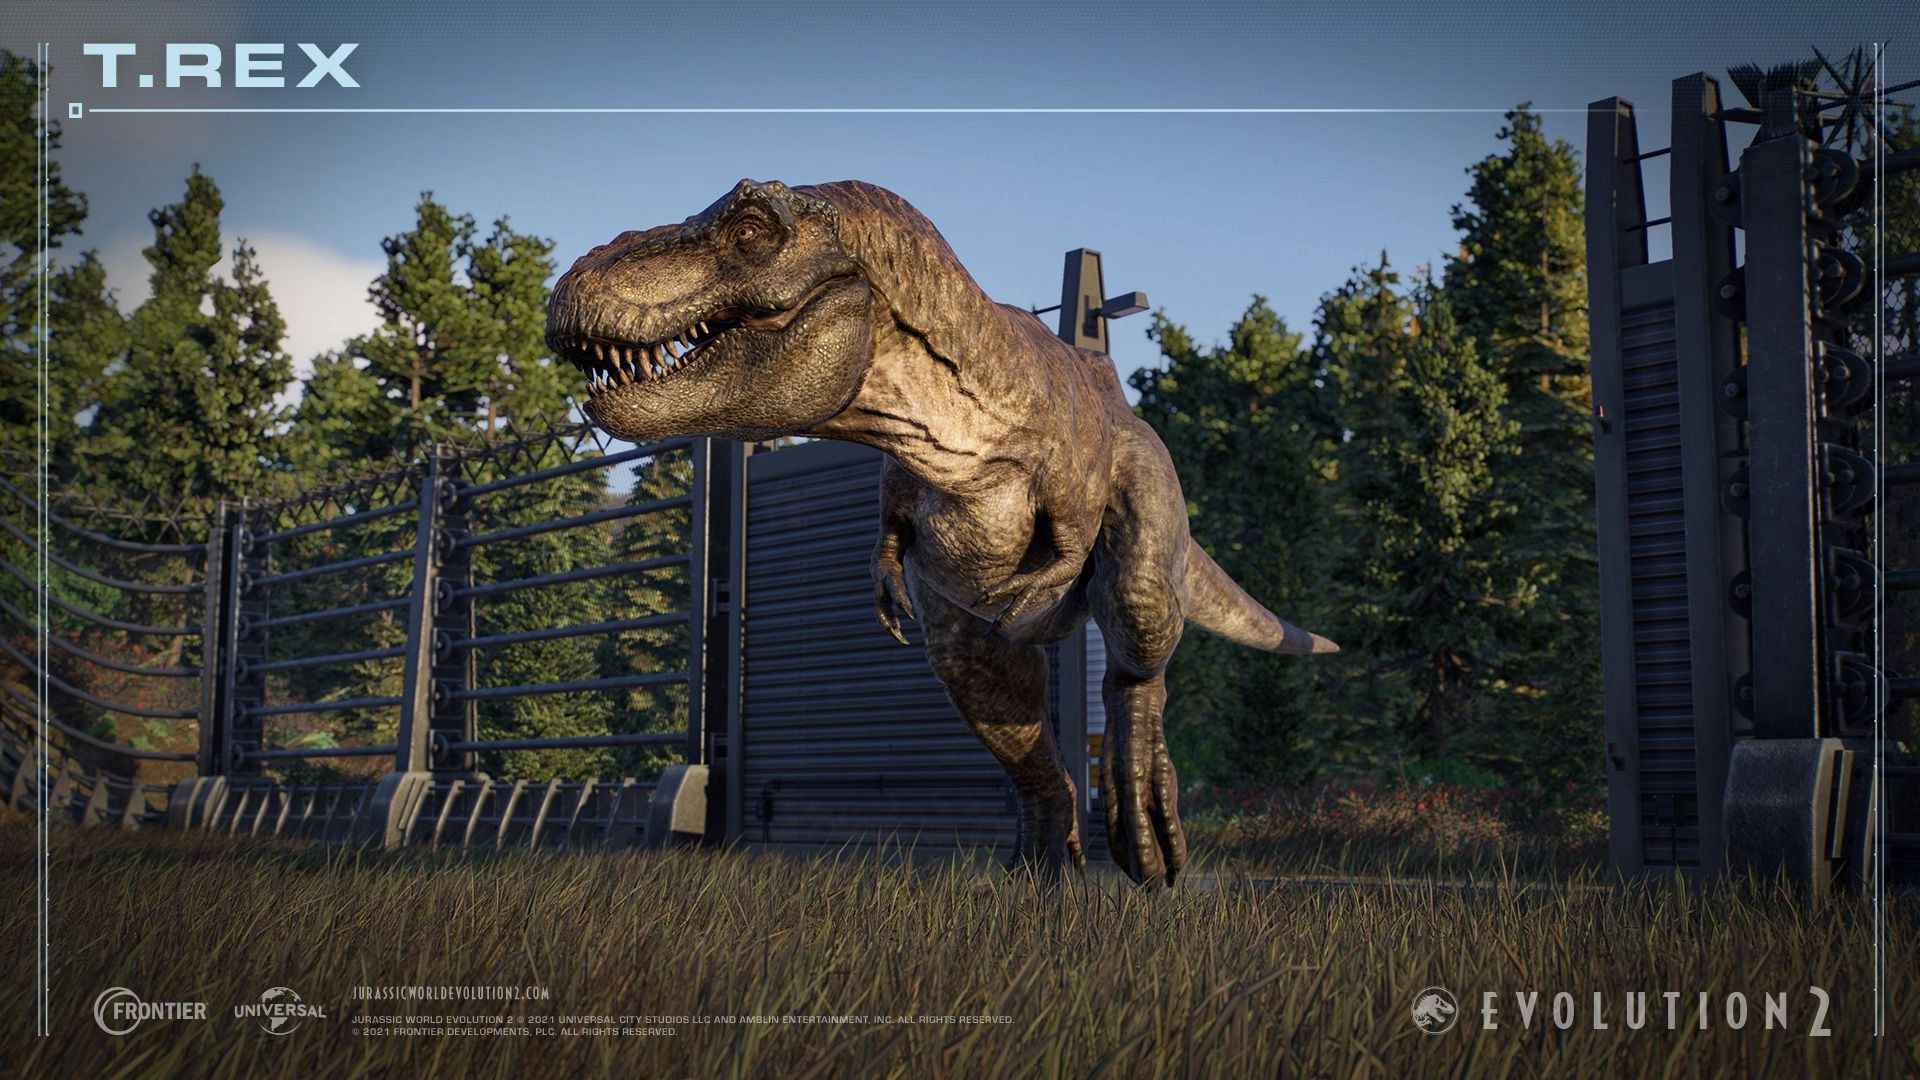 How to Move Dinosaurs in Jurassic World Evolution 2